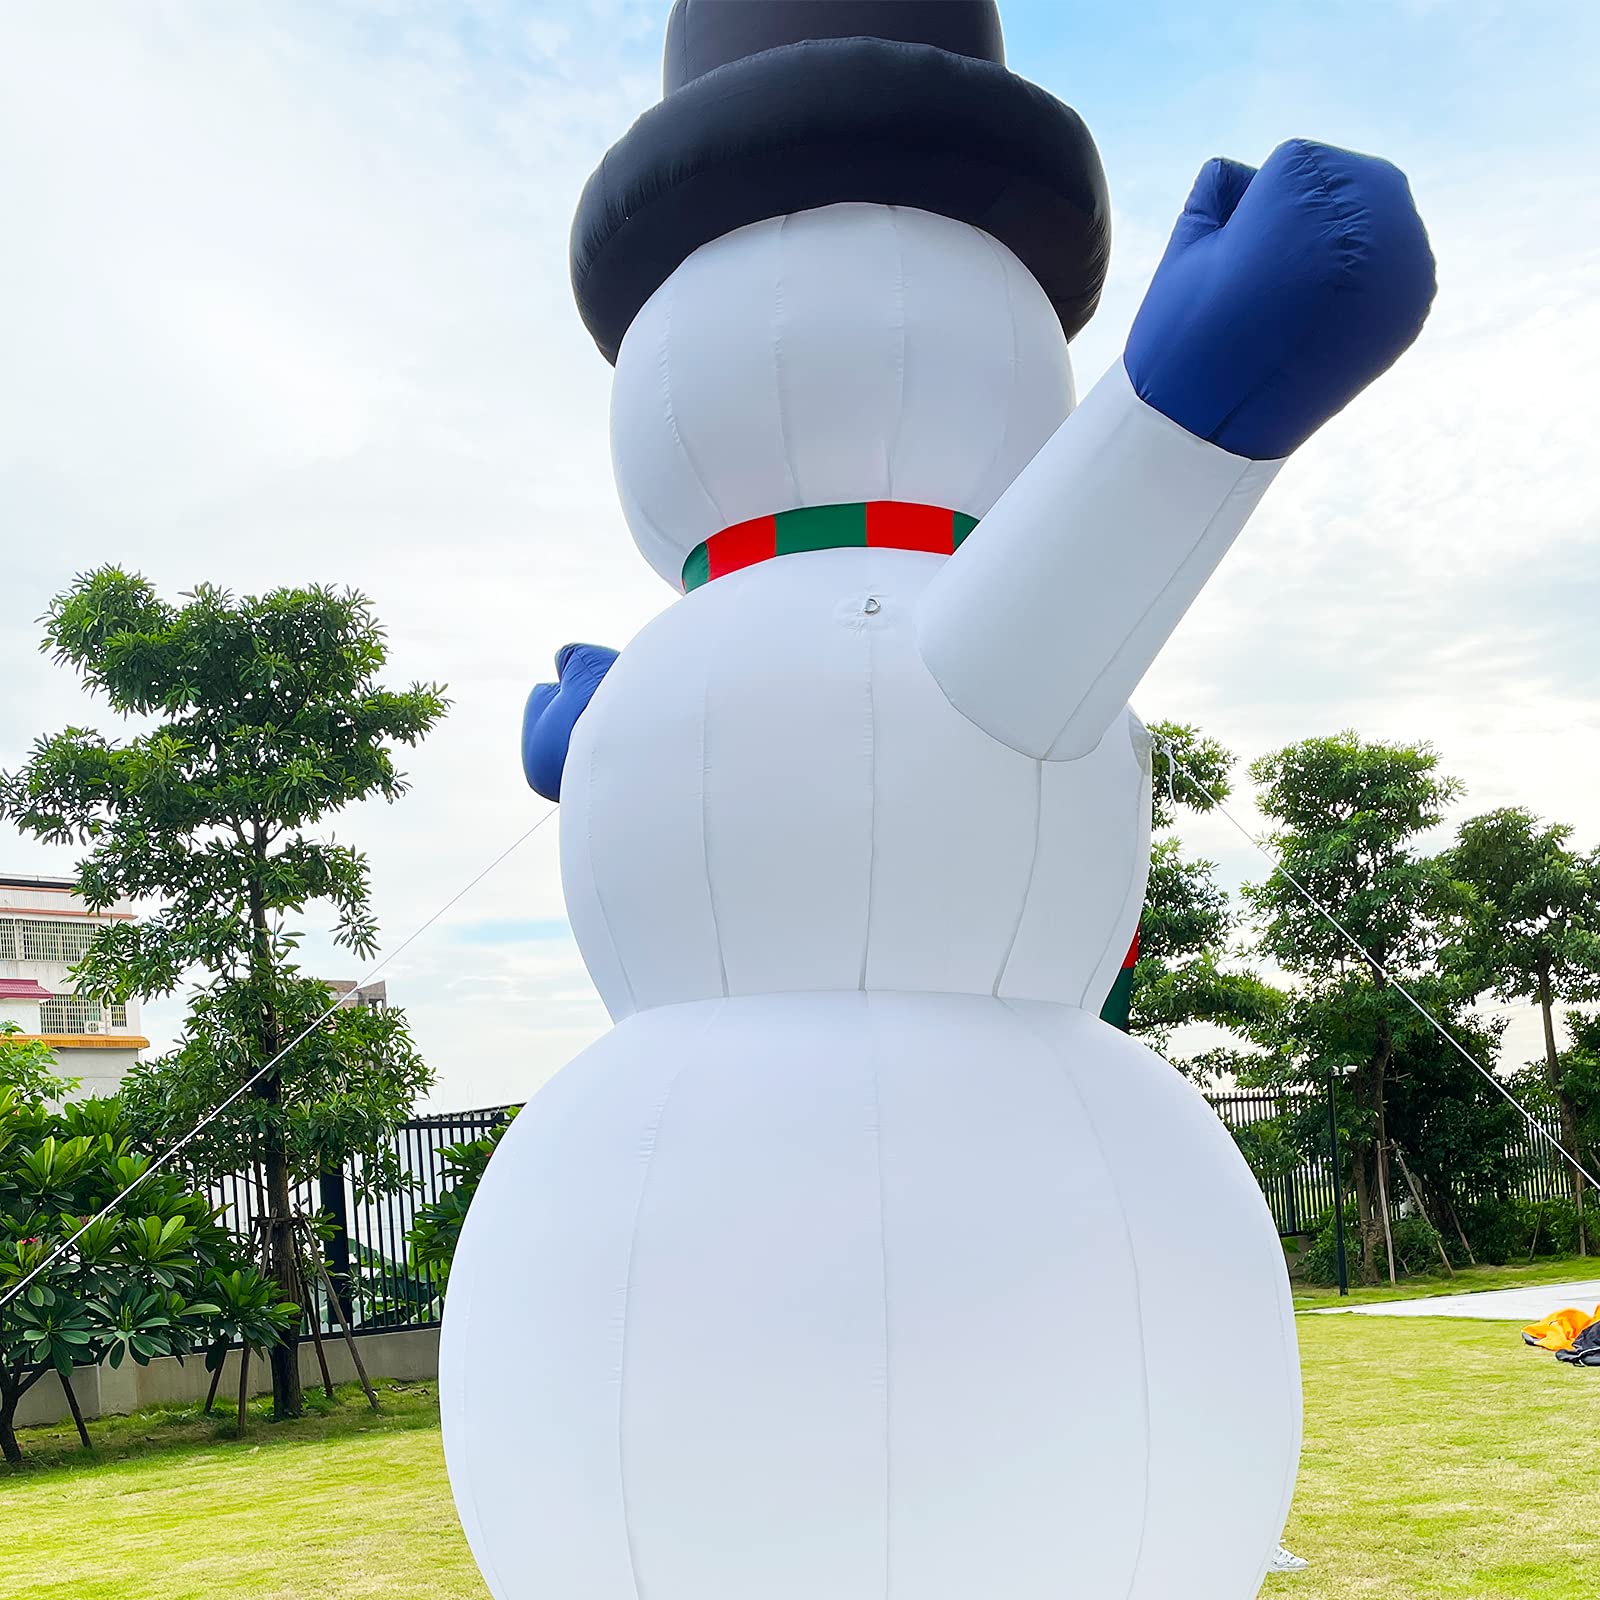 40Ft Giant Inflatable Snowman for Christmas with Blower Snowman Inflatable Outdoor Yard Decoration Lawn Xmas Party Blow Up Decoration with No Light